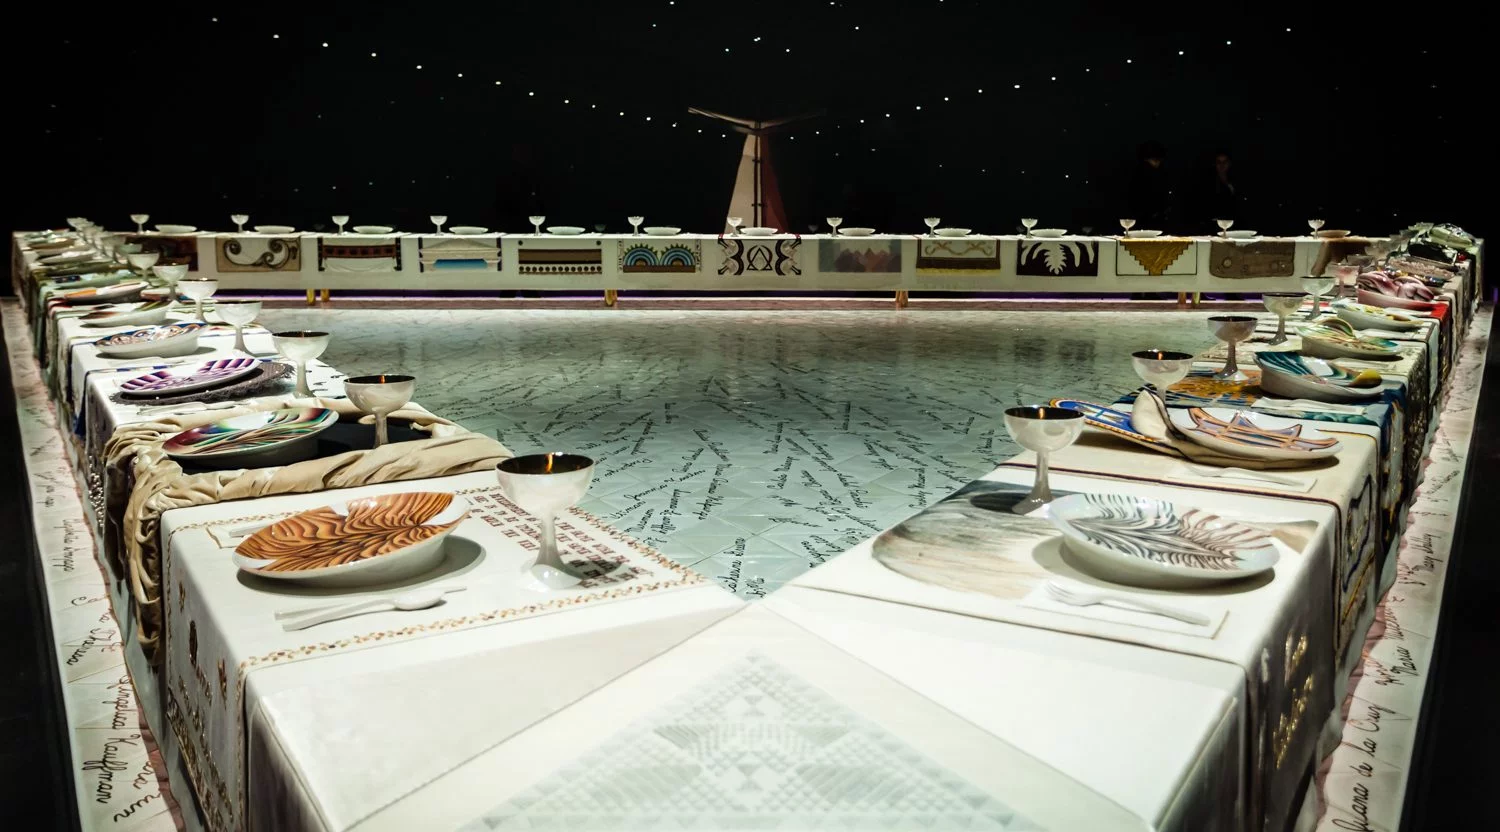 Judy Chicago, The Dinner Party, 1974-1979, Elizabeth A. Sackler Center for Feminist Art at the Brooklyn Museum, New York, NY, USA. Kevin Case/Flickr (CC BY-NC-SA 2.0). Ausschnitt.